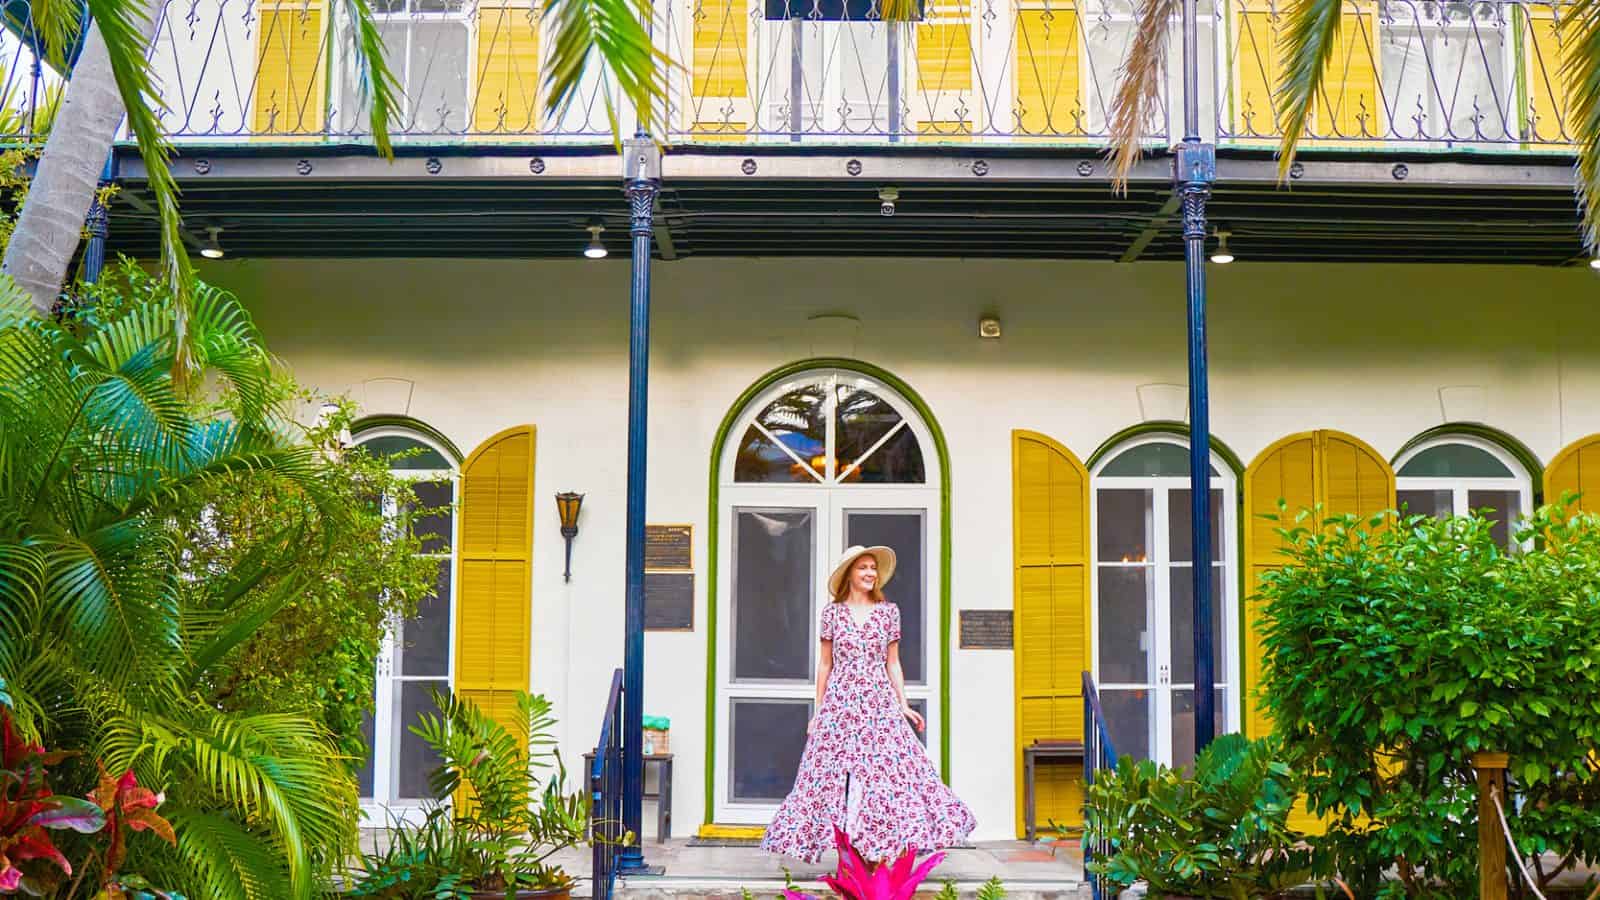 A woman in a dress and sun hat smiles on the front steps of the Ernest Hemingway Home and Museum.